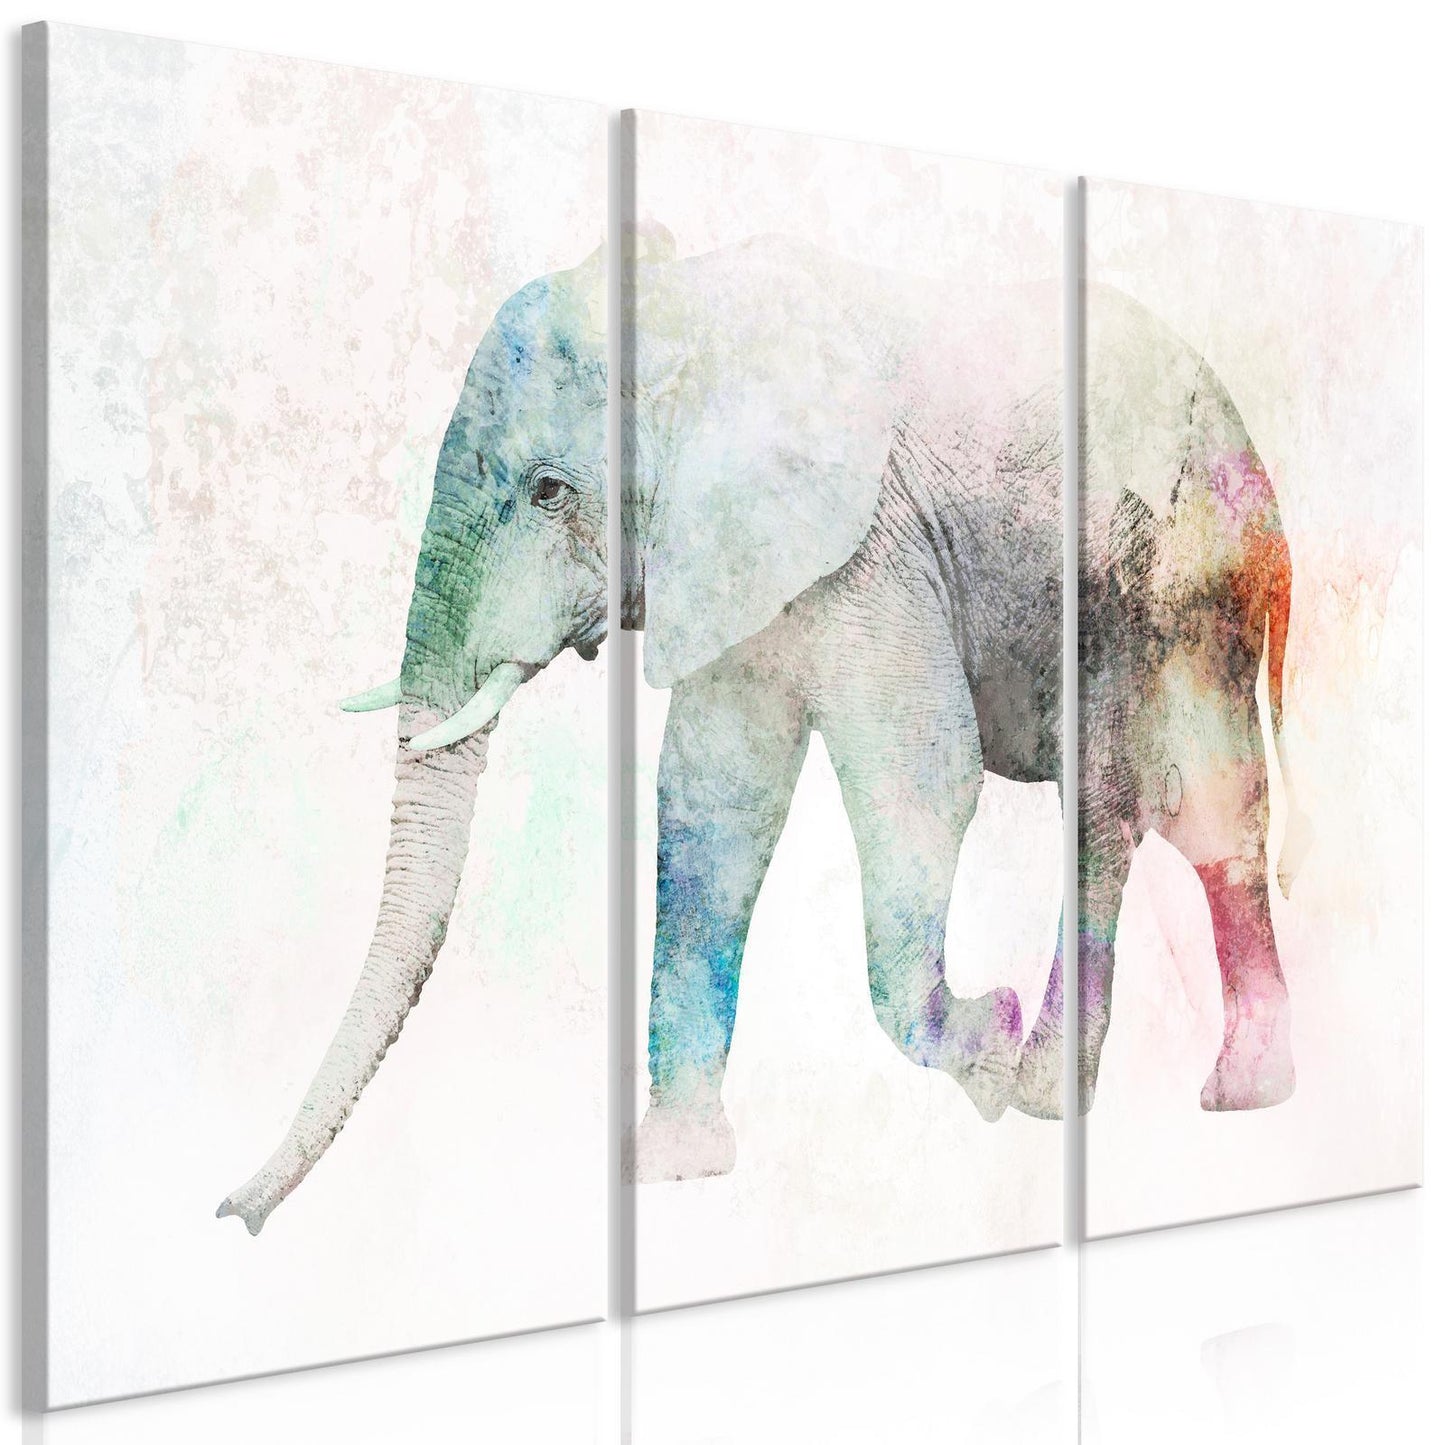 Painting - Painted Elephant (3 Parts)